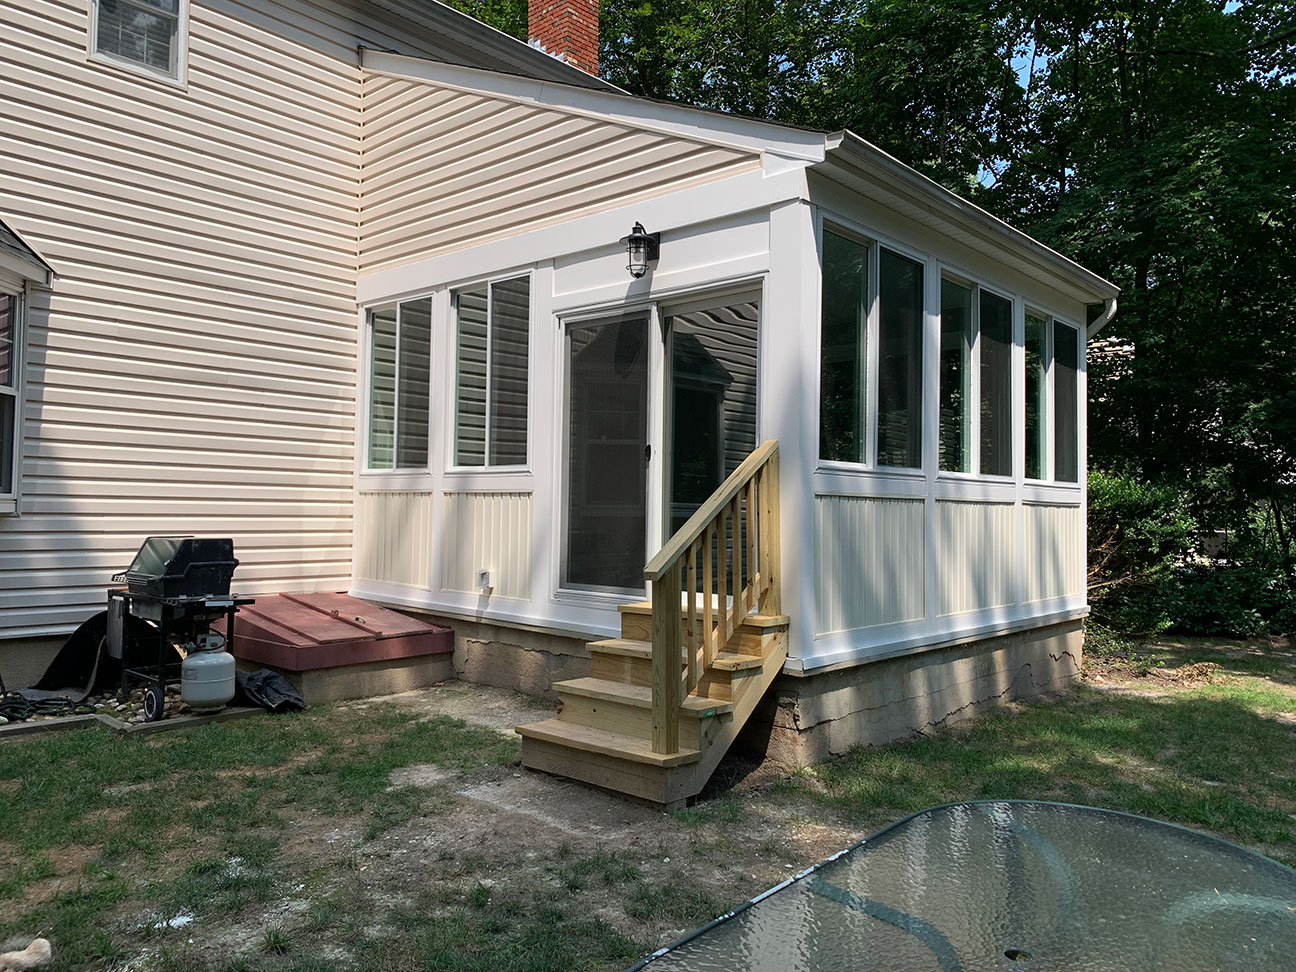 Existing Porch Remodeled into Living Space